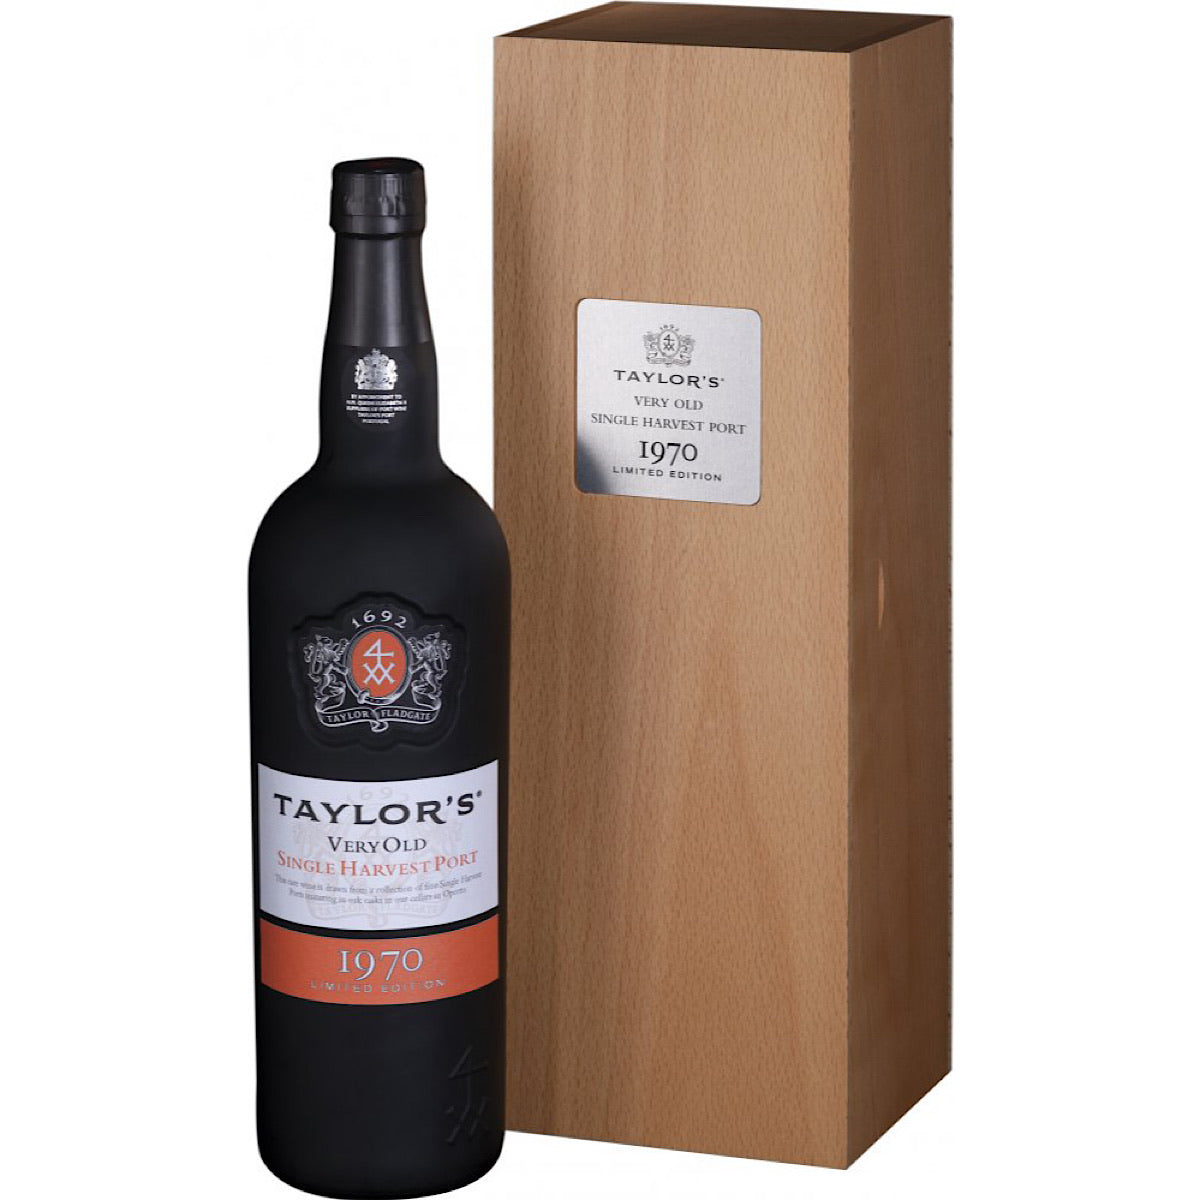 Taylors Very Old Single Harvest Vintage 1970 Port  in Wooden Gift Box.